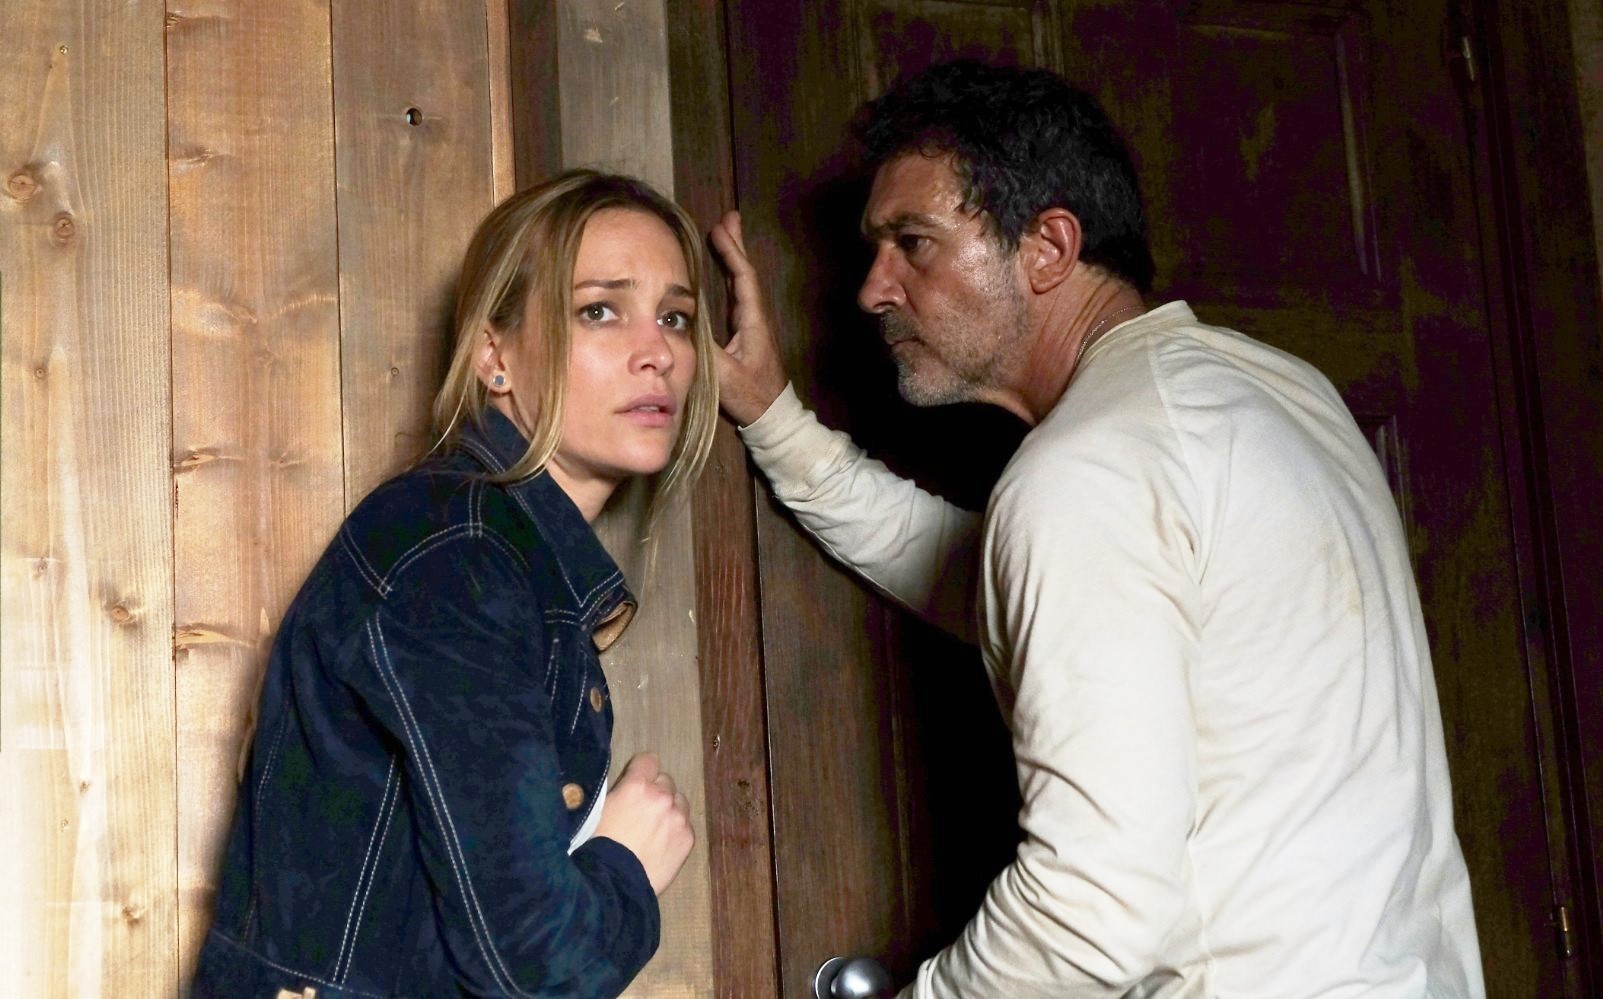 Piper Perabo stars as Laura and Antonio Banderas stars as Paul in Lionsgate Premiere's Black Butterfly (2017)